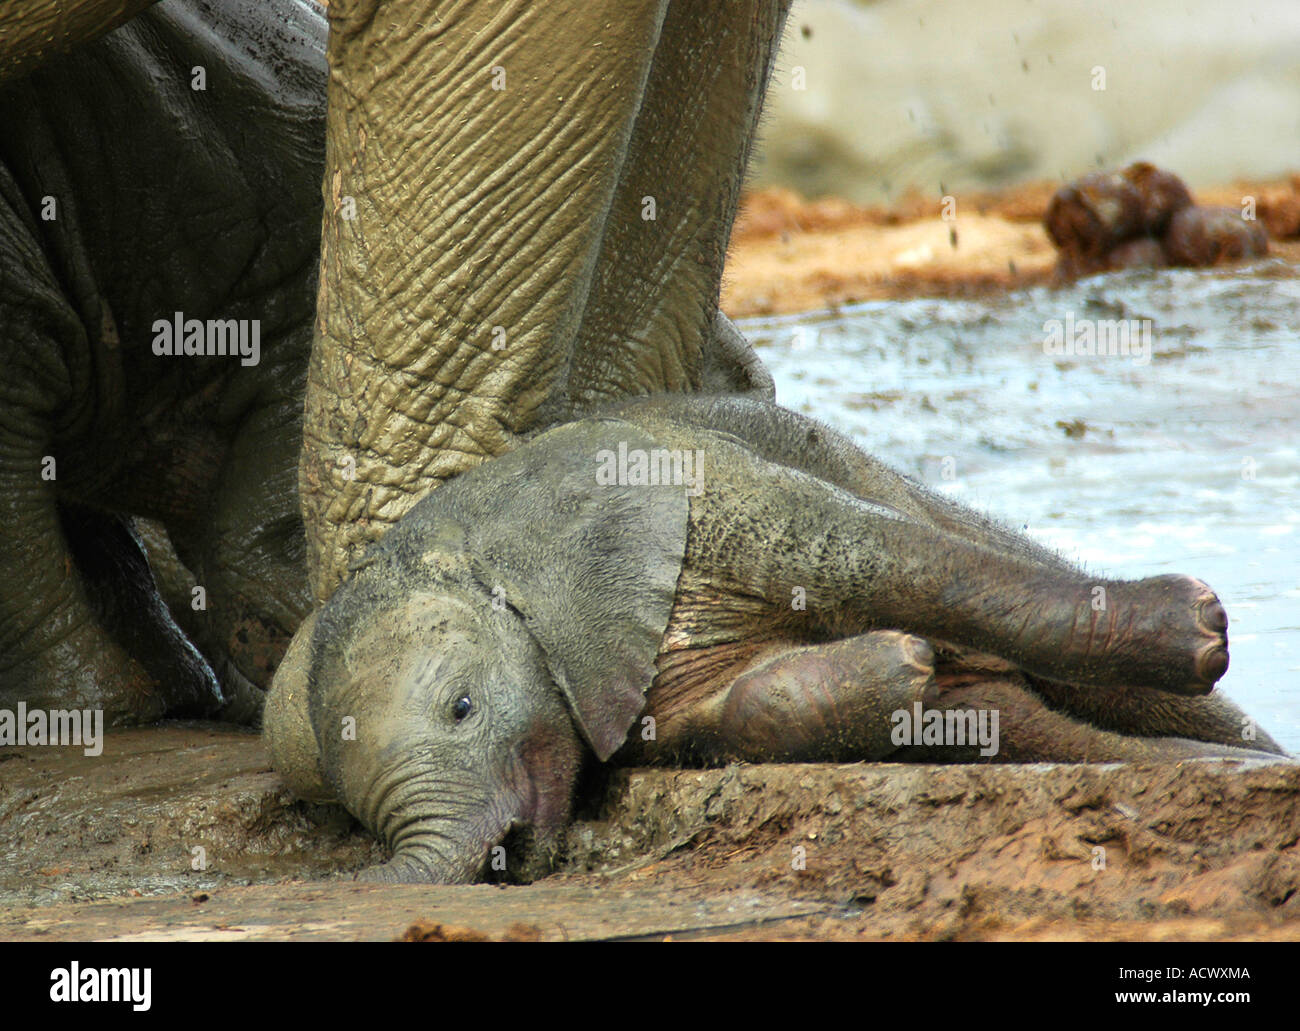 Baby elephant calf rests on side at mother's feet, Addo elephant national park South Africa Stock Photo